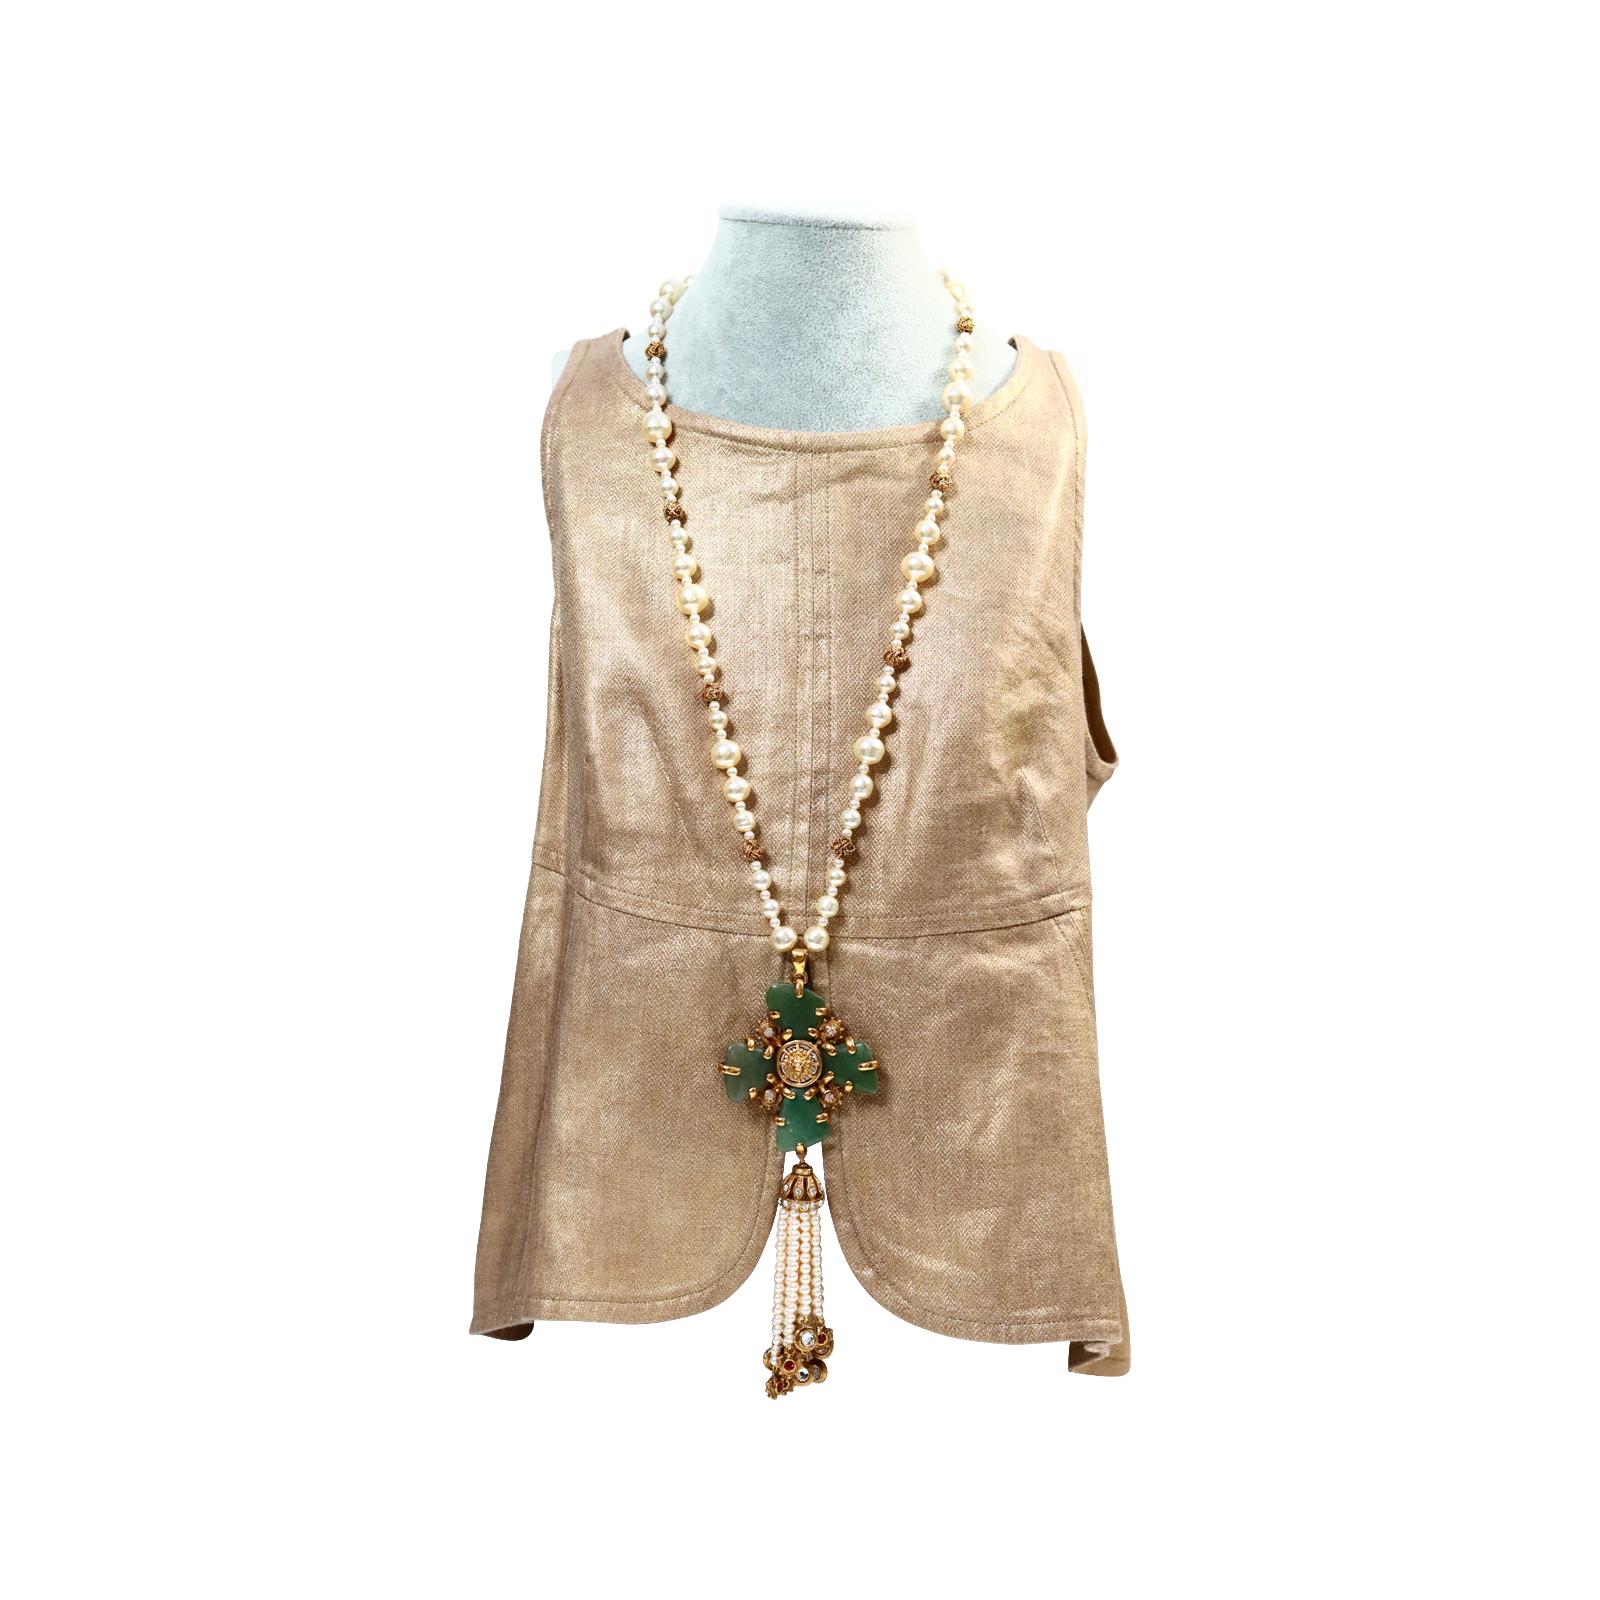 Collectible Chanel Couture Pearl with Green Cross and Dangling Pearls Circa 2005 For Sale 4